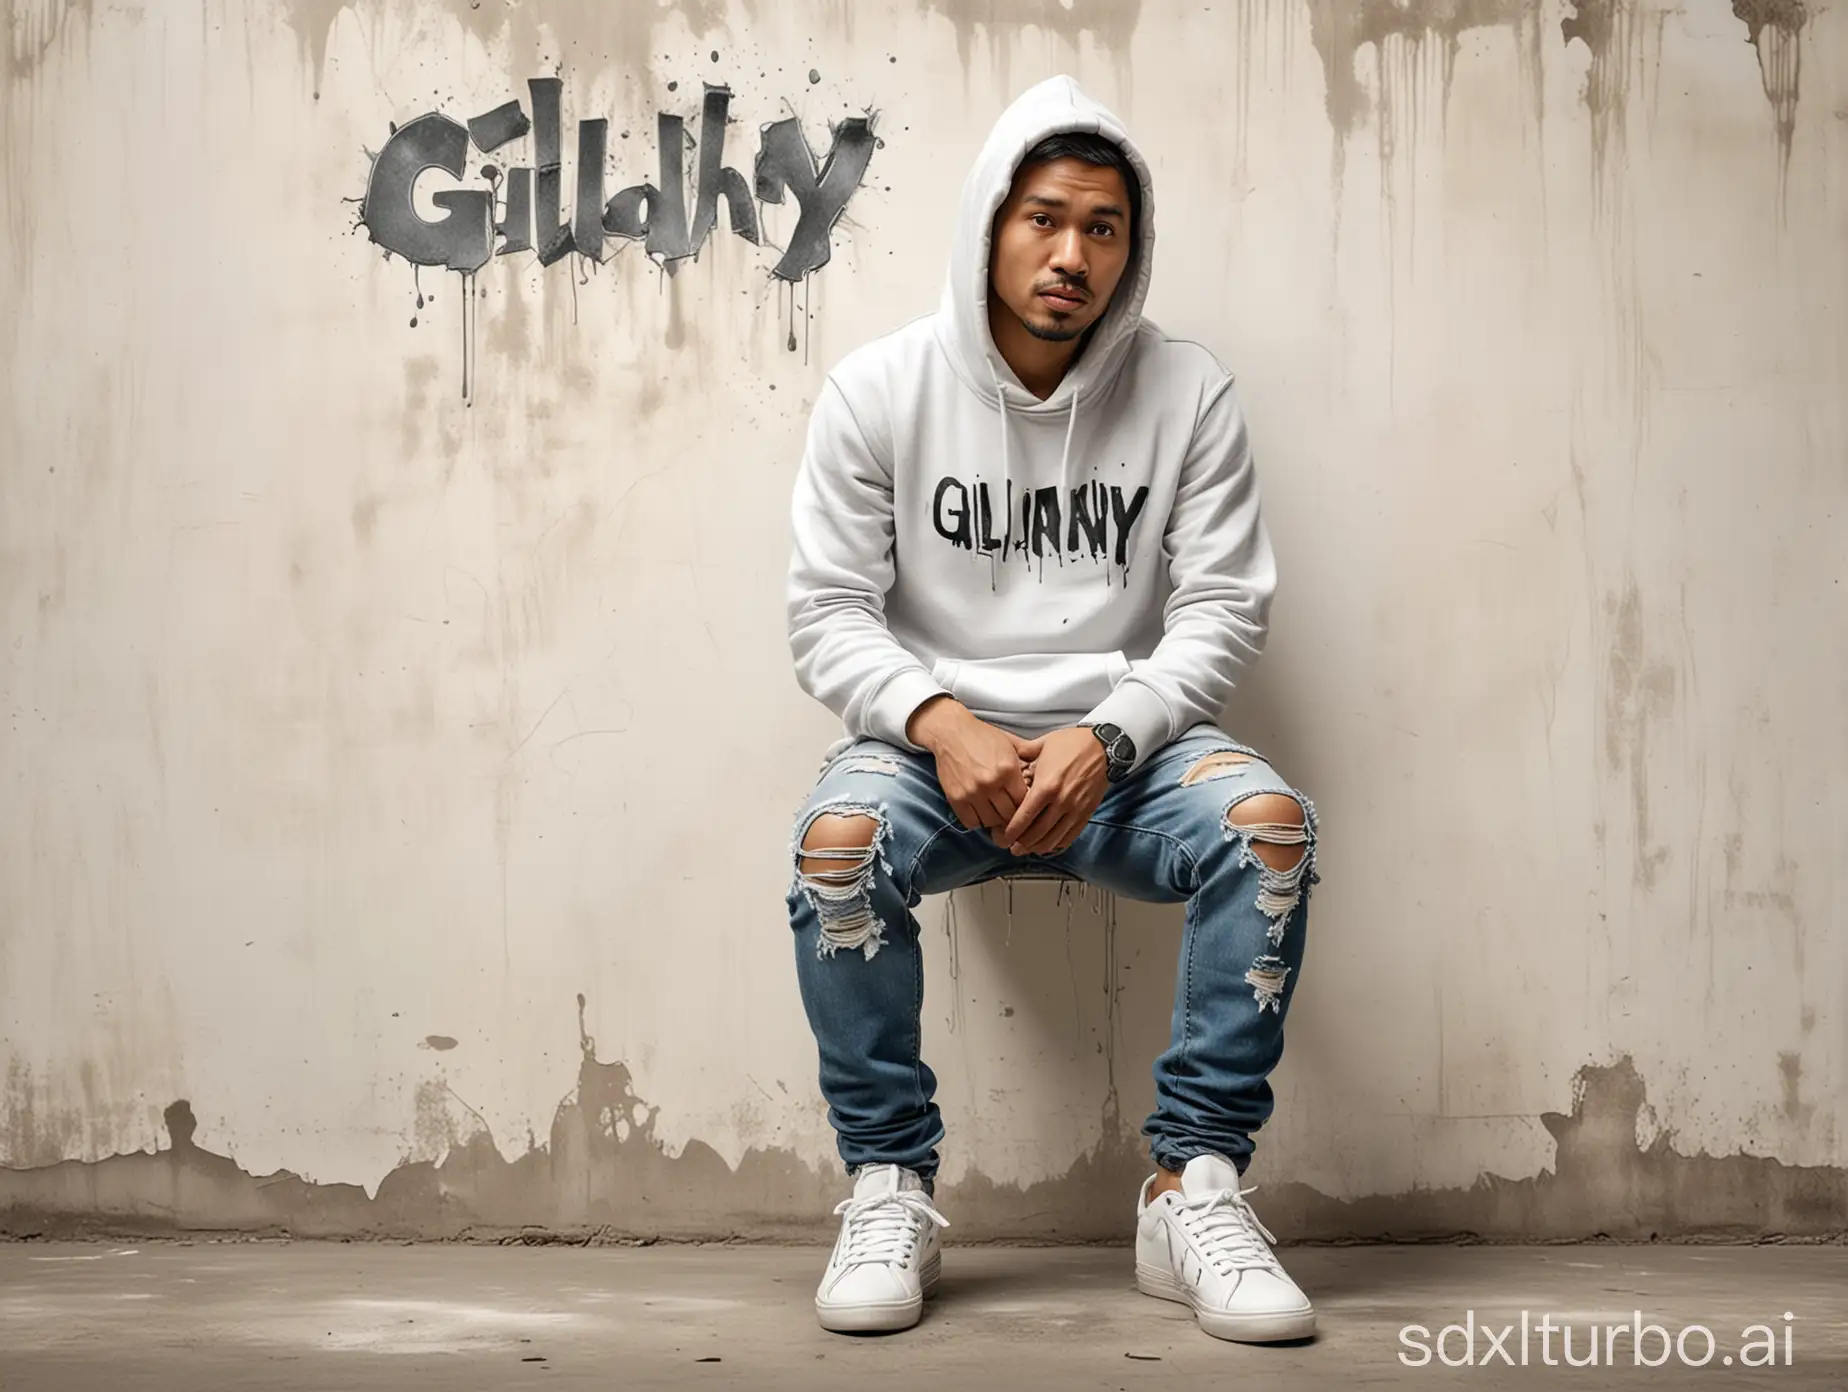 create a 4D caricature of a 35 year old Indonesian man standing leaning against a wall, he is wearing a hoodie, ripped jeans and sneakers. The white wall background is moldy and has the words "Gilvandhy" written on it.